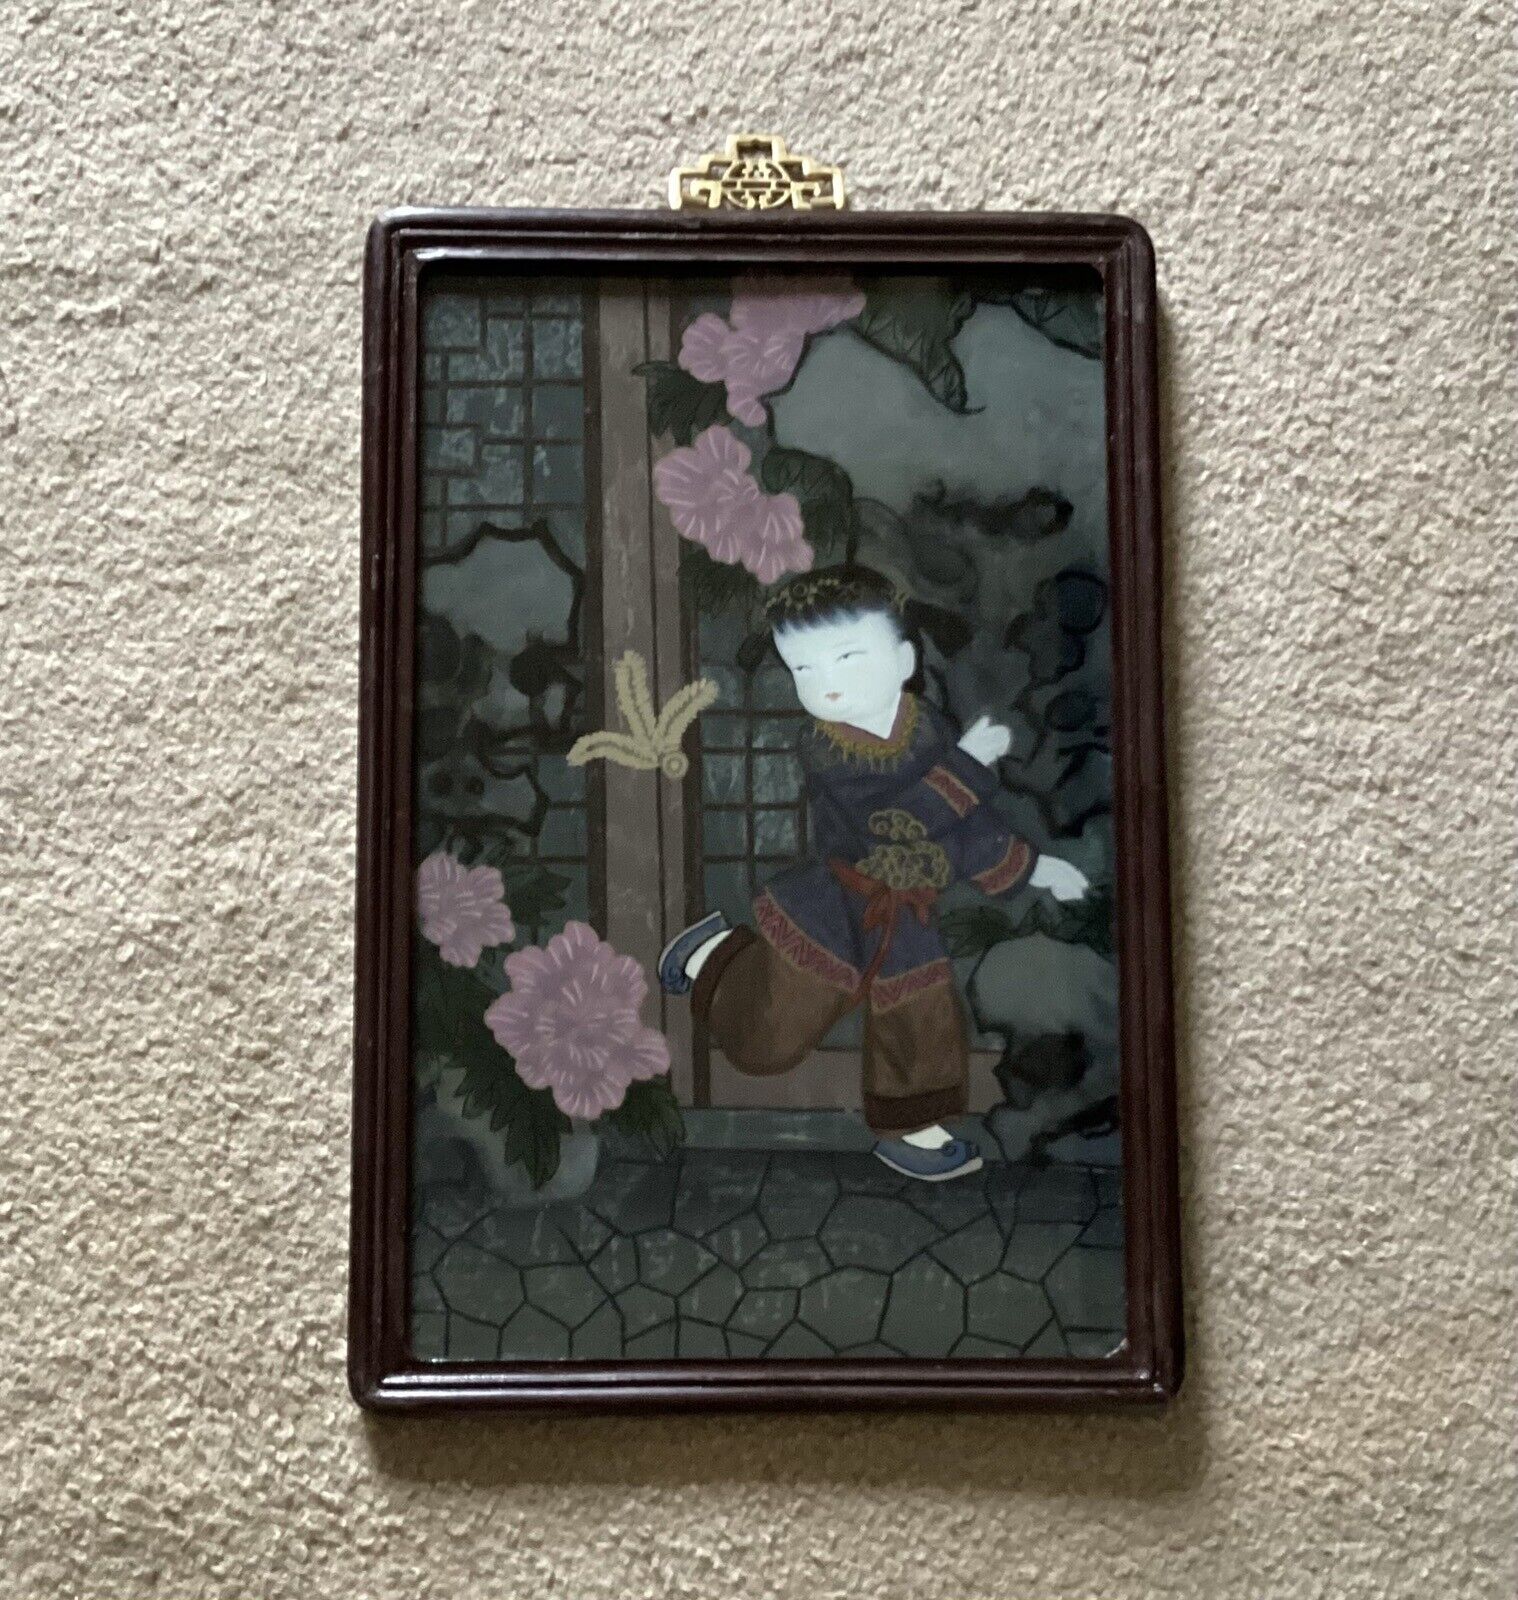 VTG/Antique R.O.C. Chinese Reverse Glass Painting, Boy With Flowers